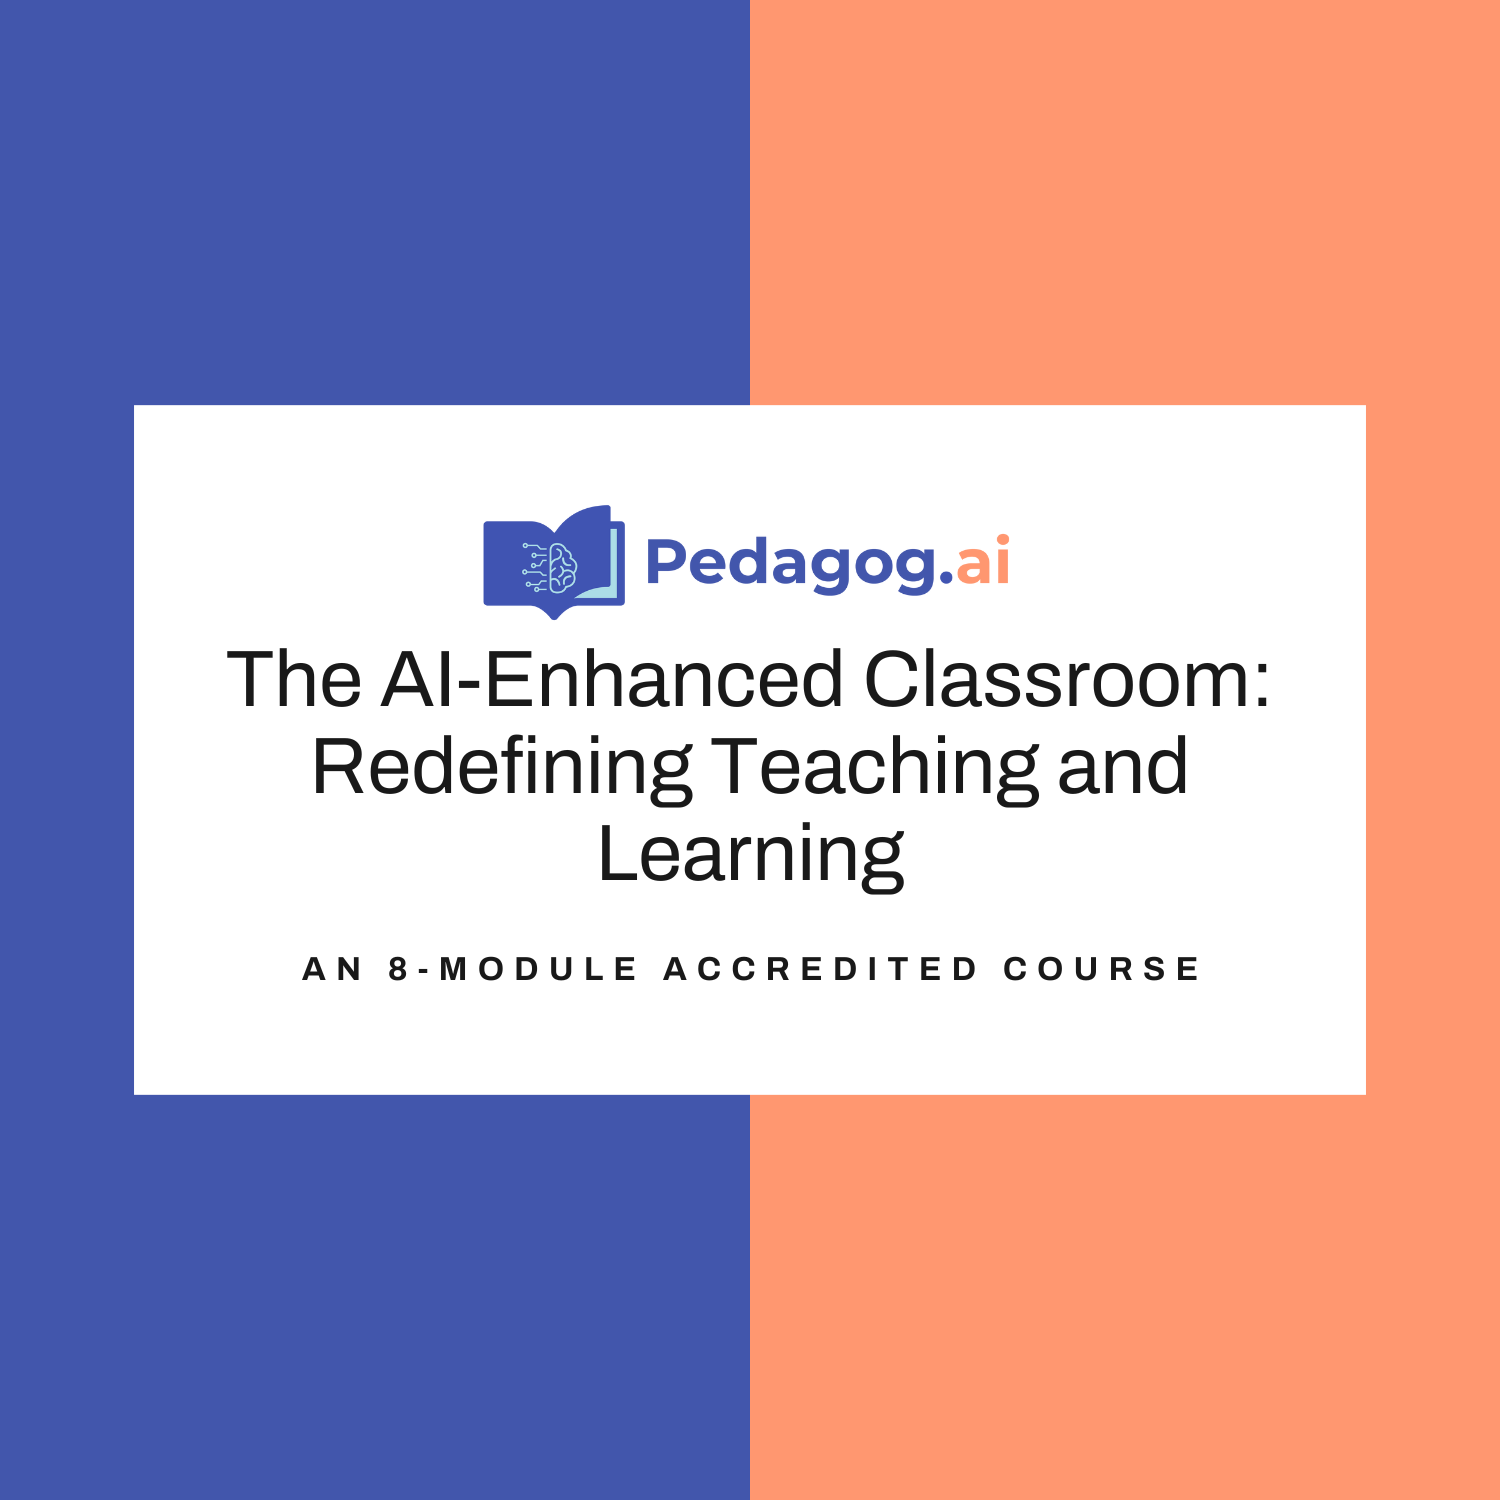 The AI-Enhanced Classroom: Redefining Teaching and Learning